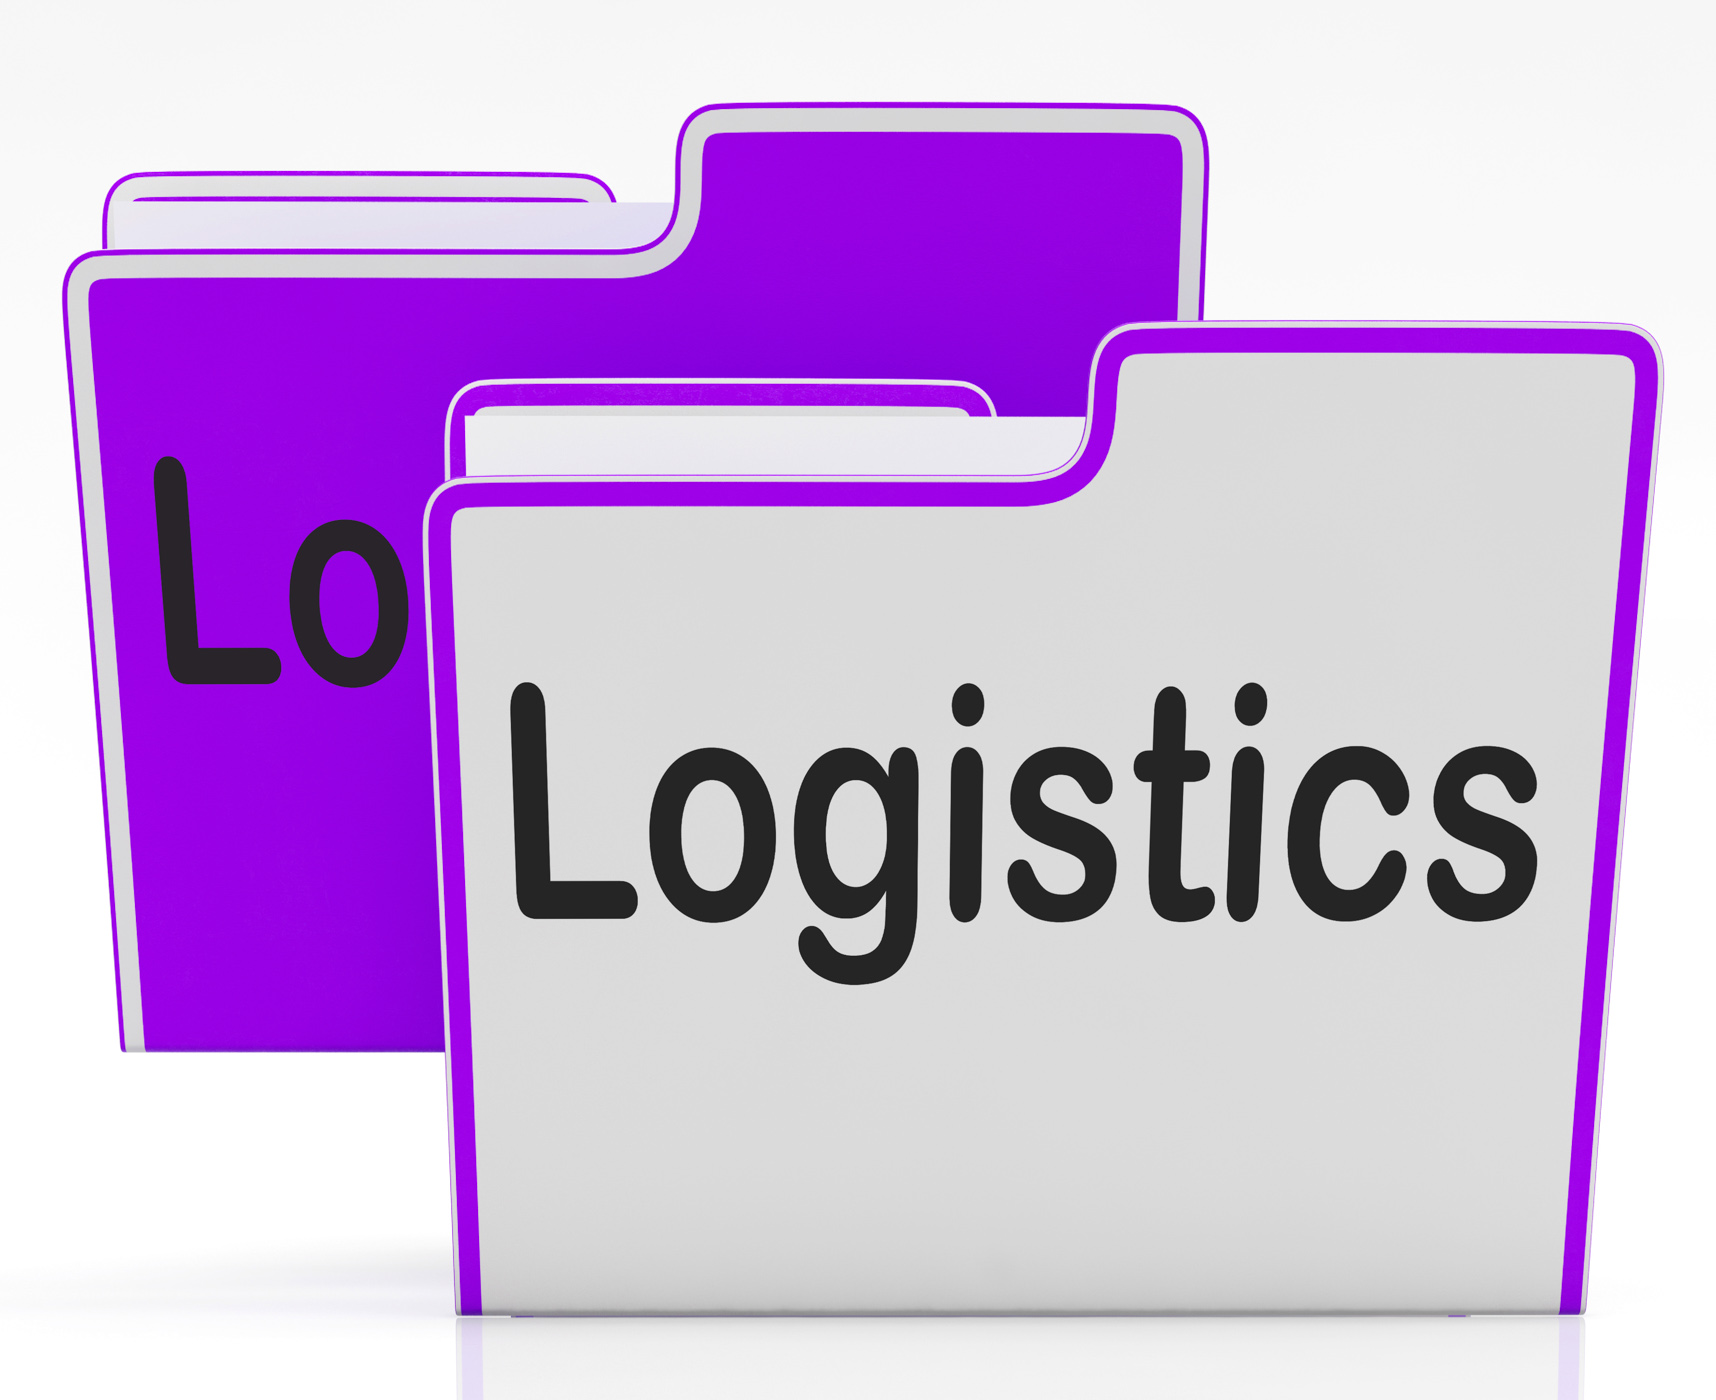 Logistics files indicates concept business and administration photo